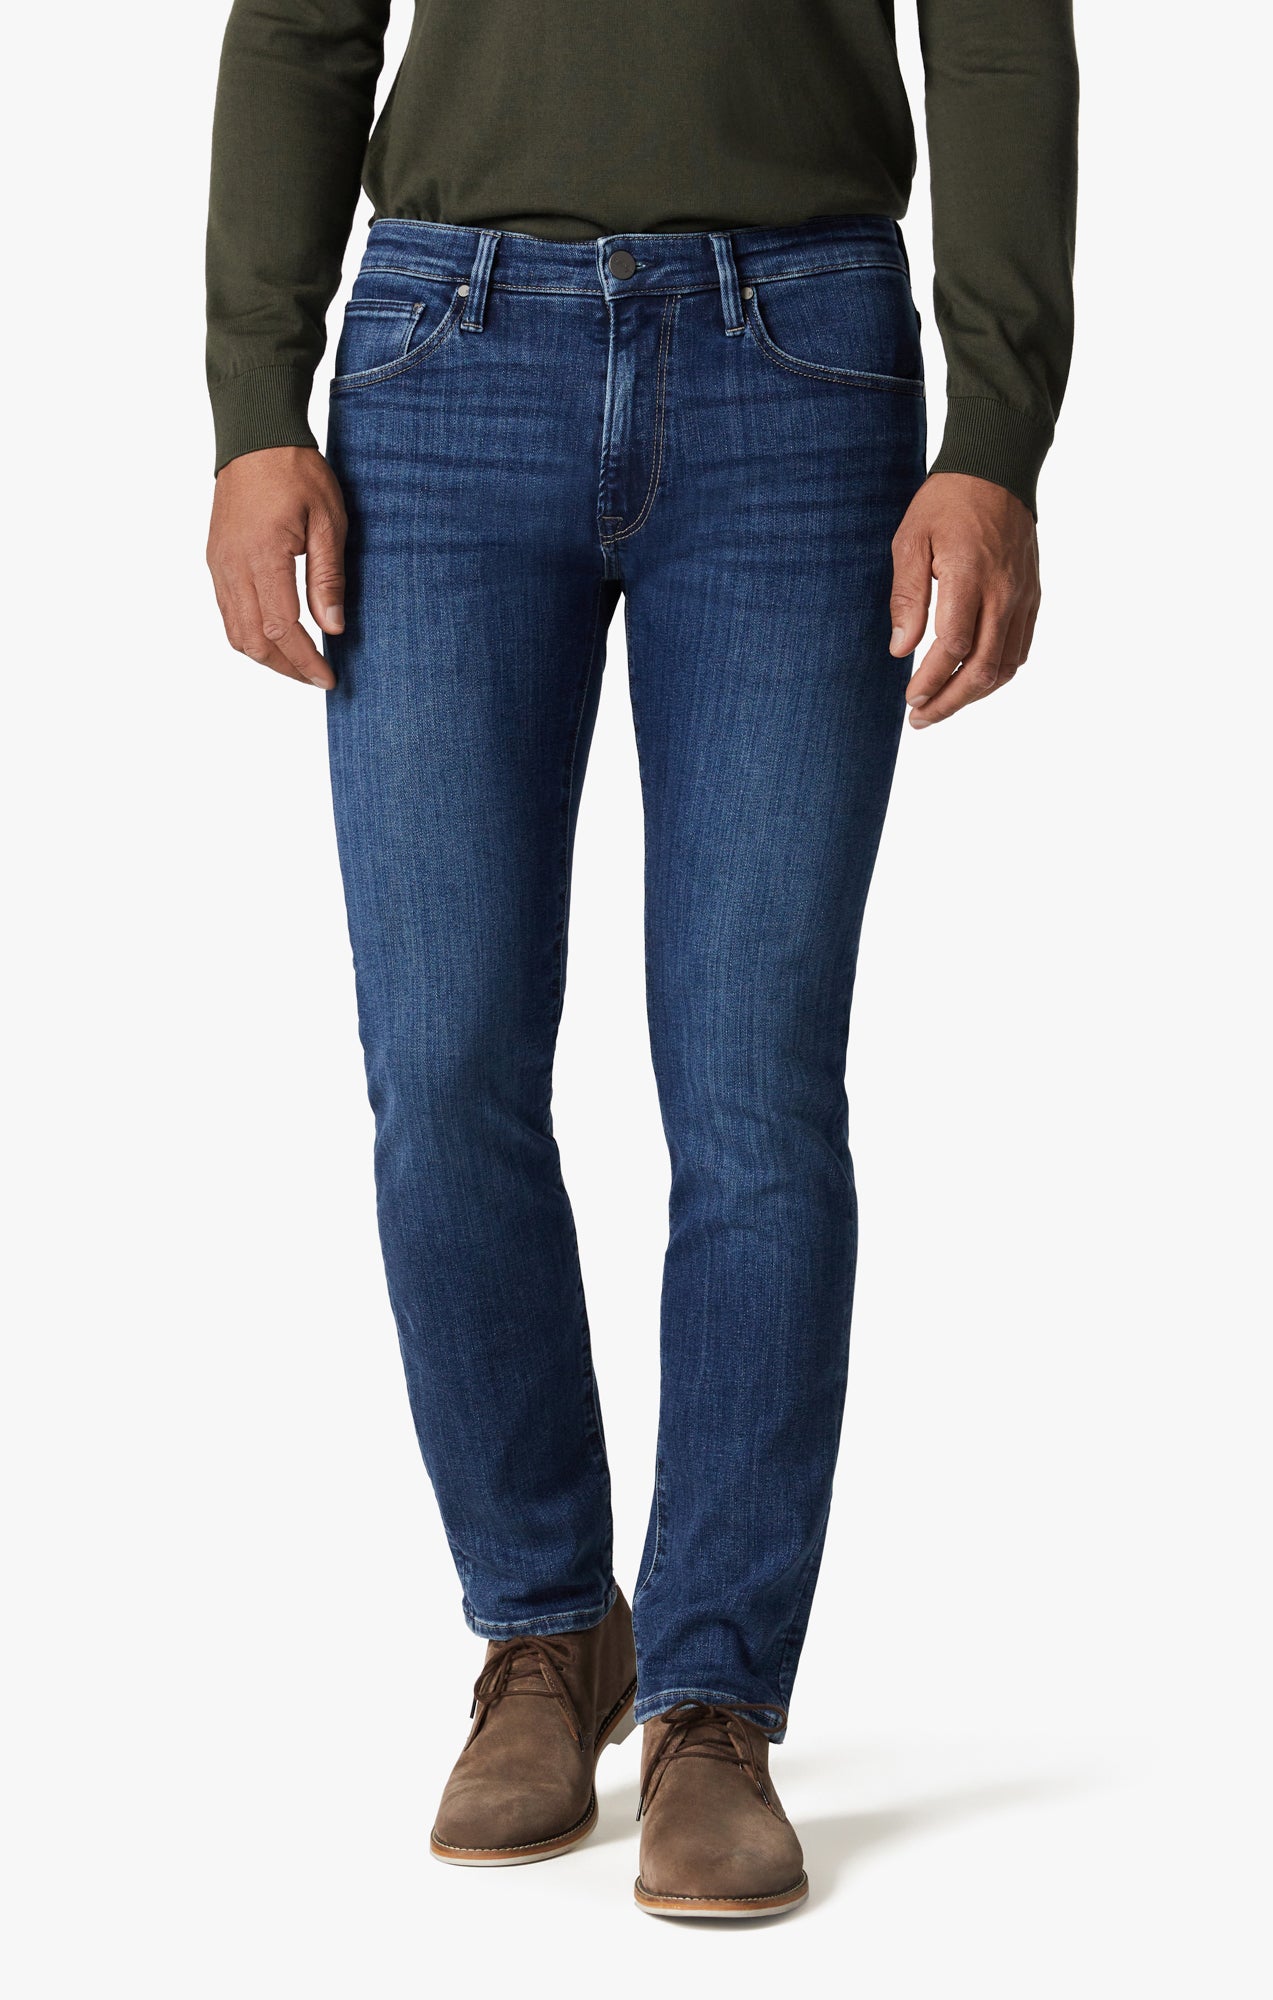 Courage Straight Leg Jeans in Deep Brushed Organic – 34 Heritage